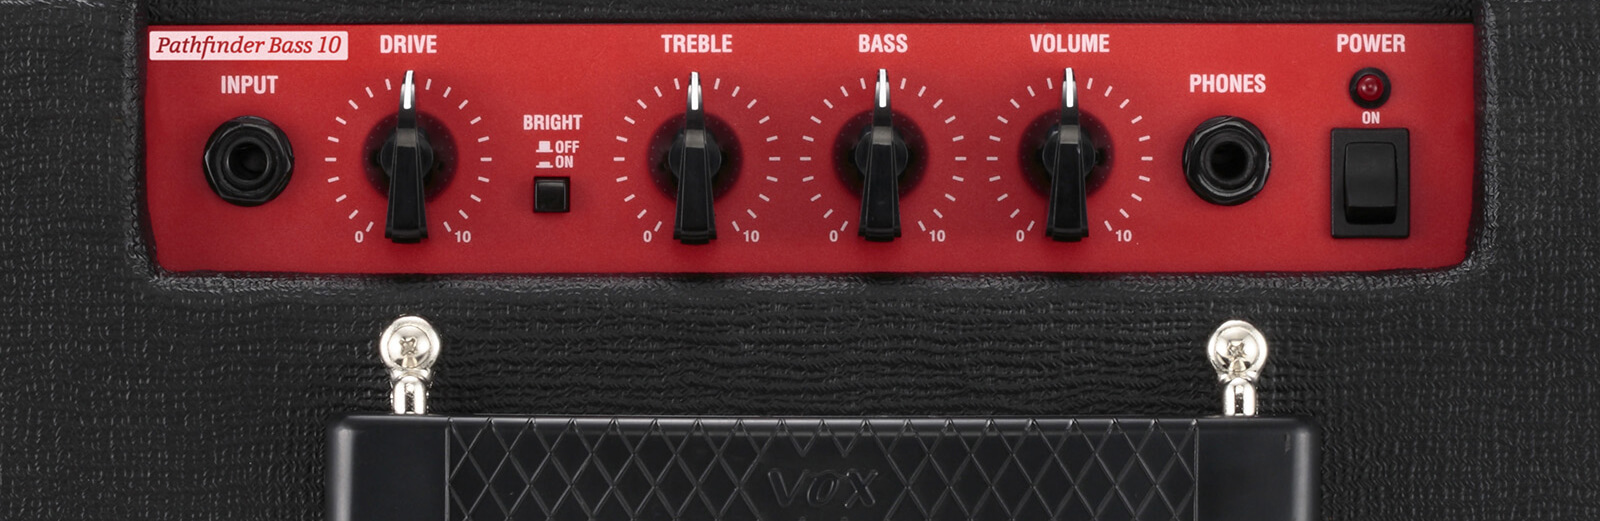 Closeup of red controls on VOX Pathfinder Bass 10